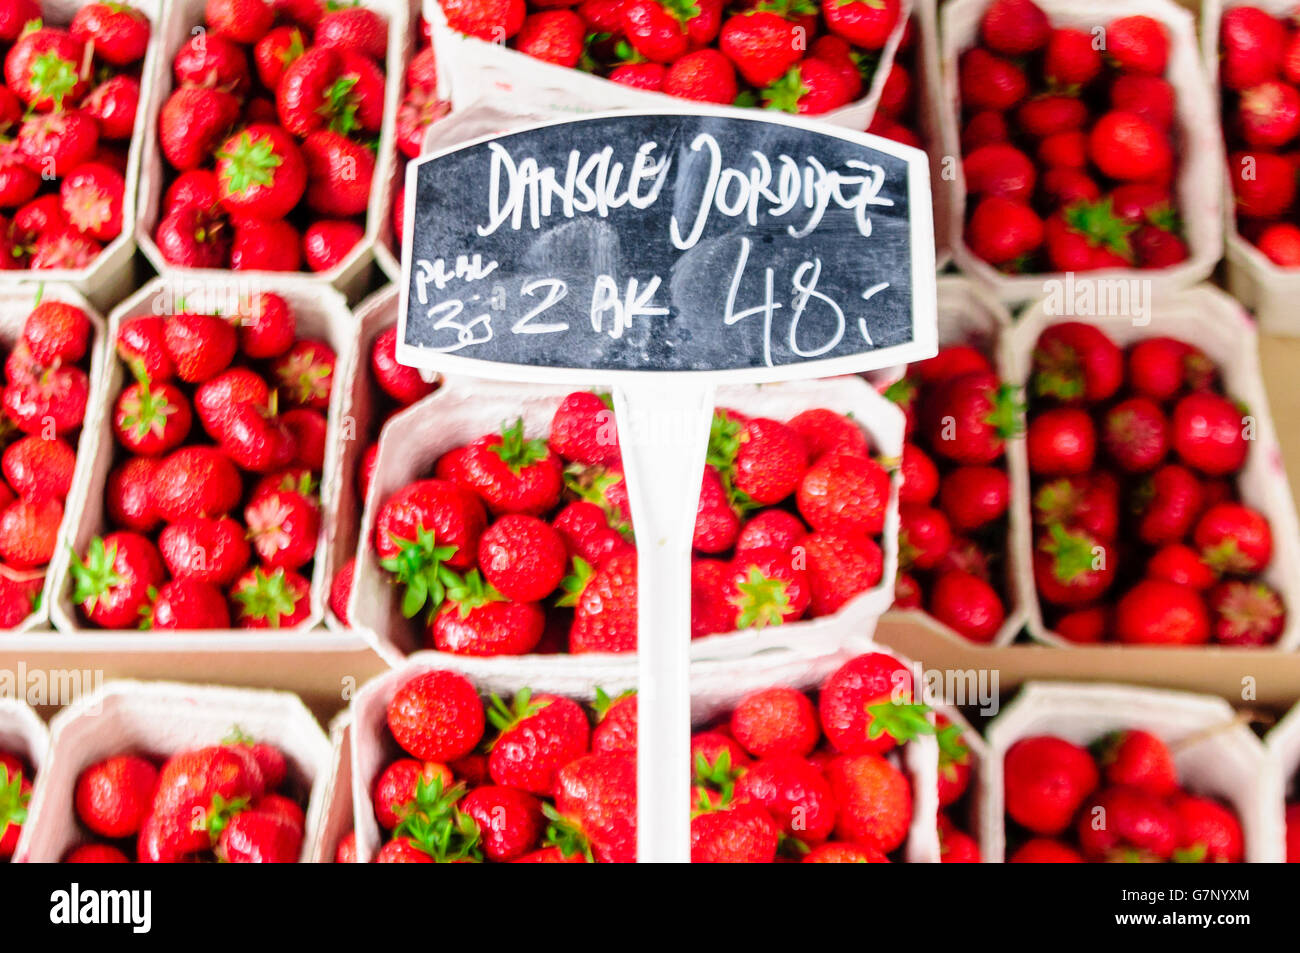 Danish strawberries for sale at a market stall Stock Photo